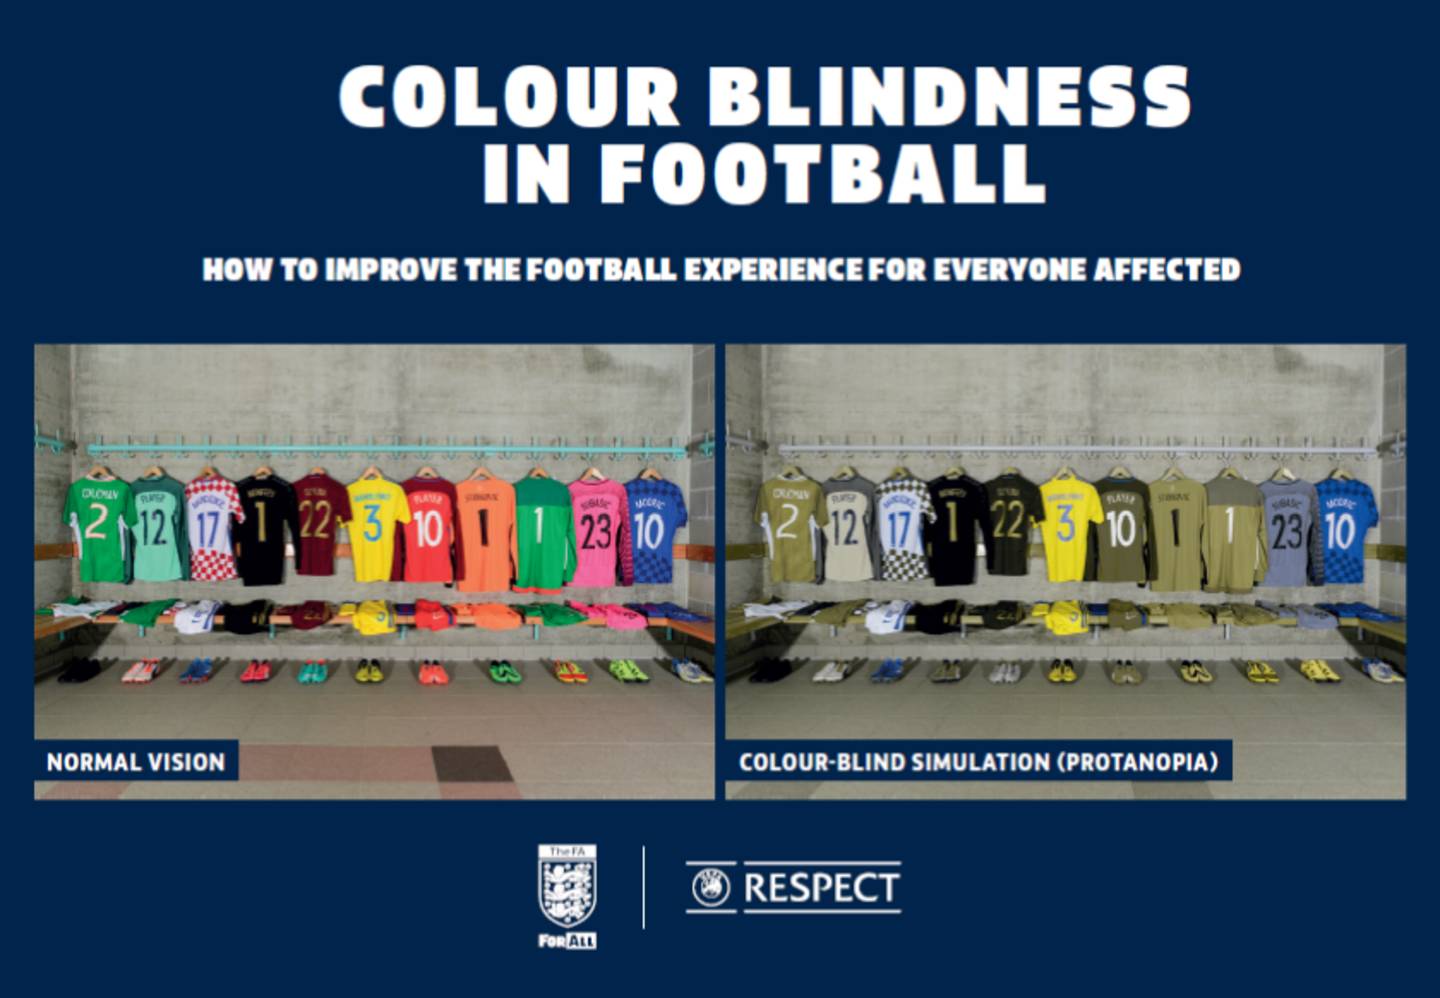 Colour blindness guide cover